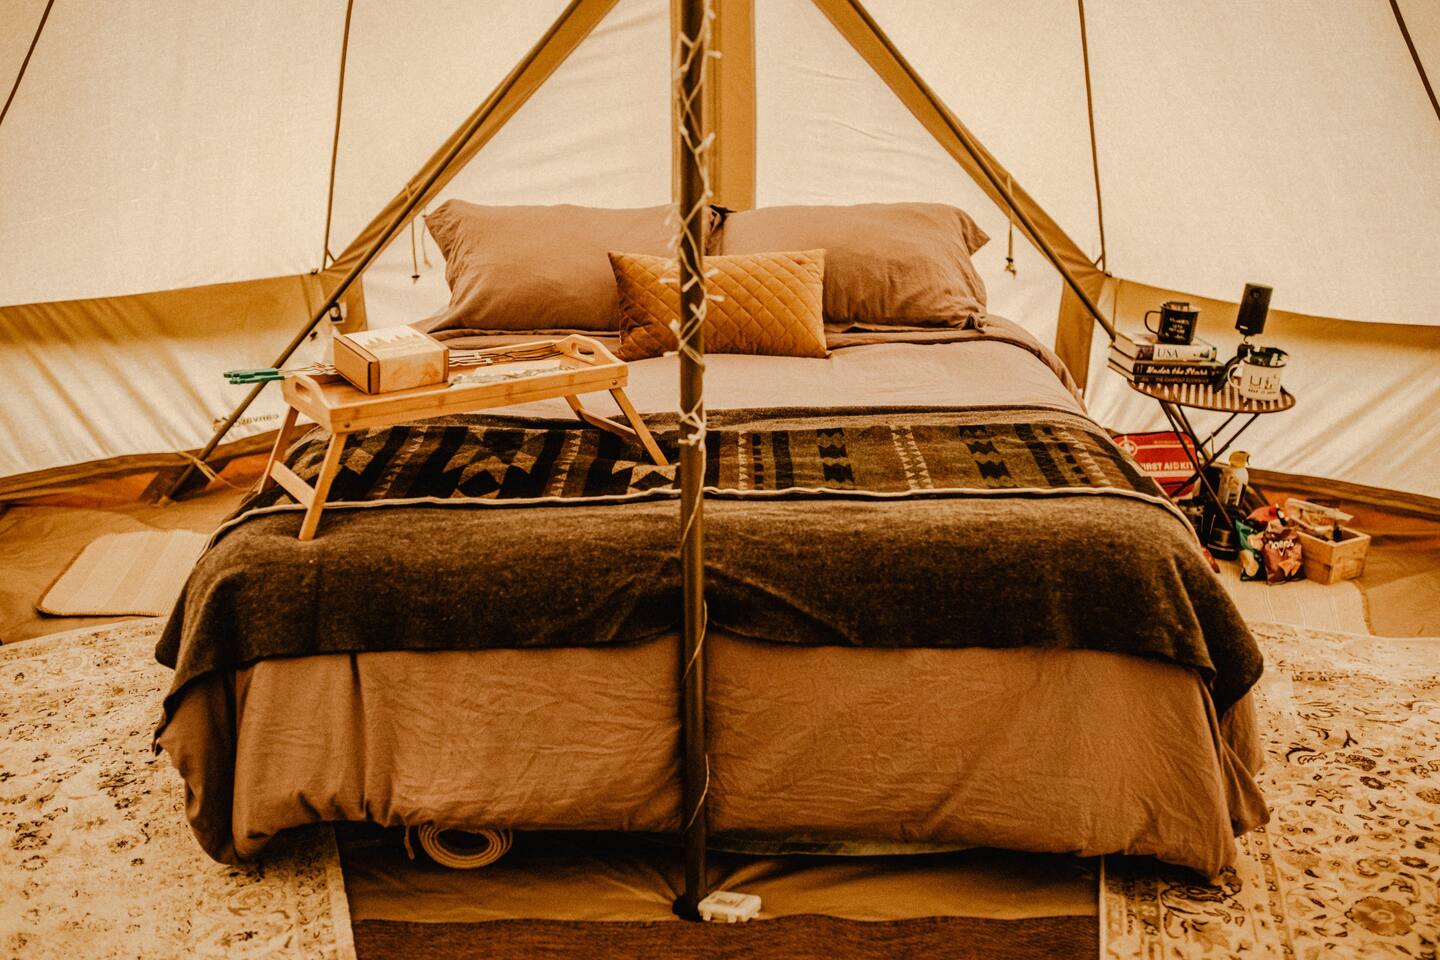 Inside the bedroom of a tent